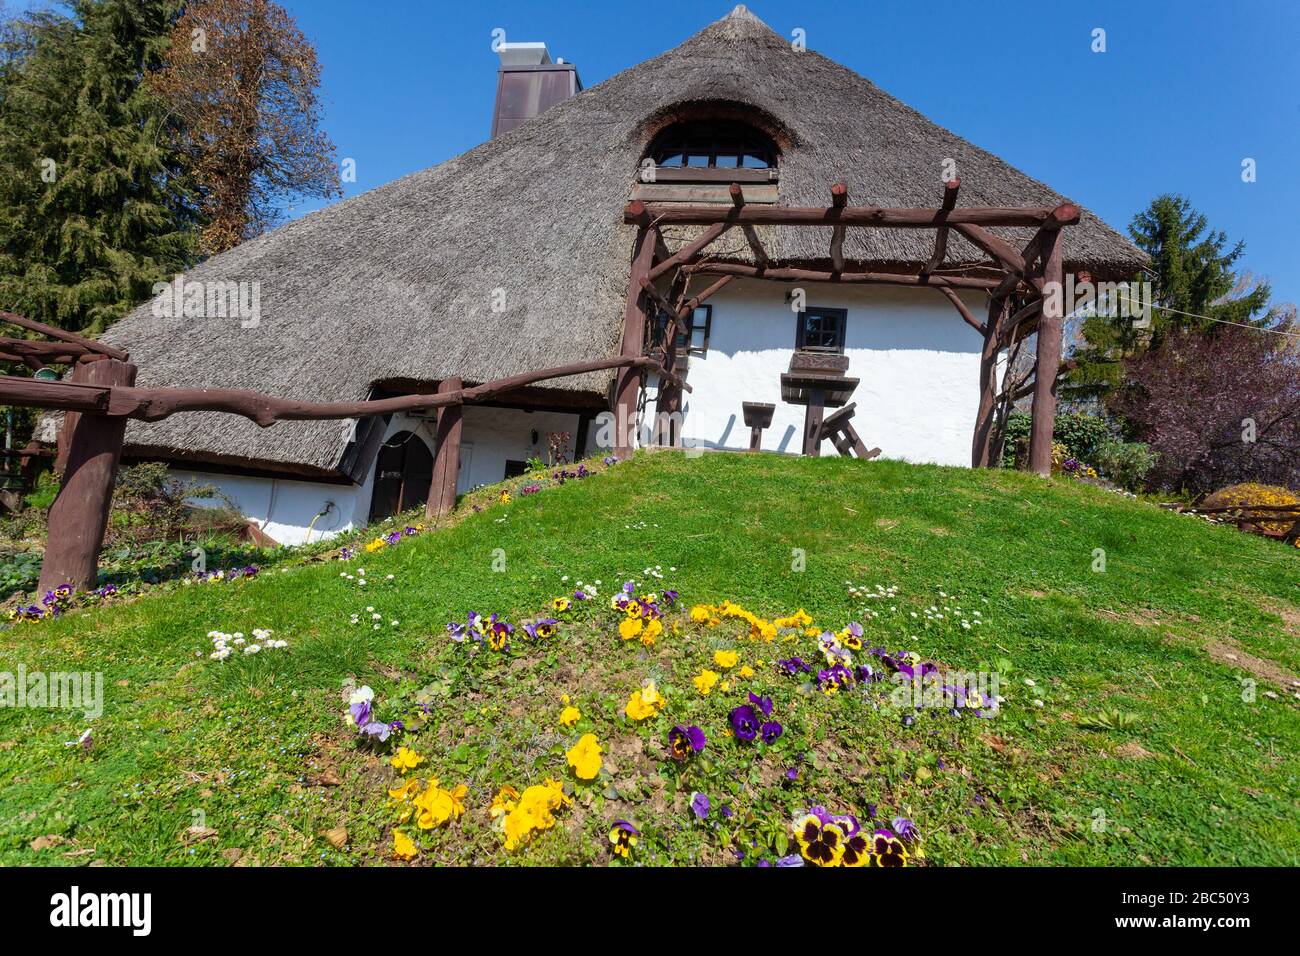 Traditional rural house with a thatched roof in Podravina region of Croatia (PRC) - Restaurant Podravska klet on PRC Stock Photo